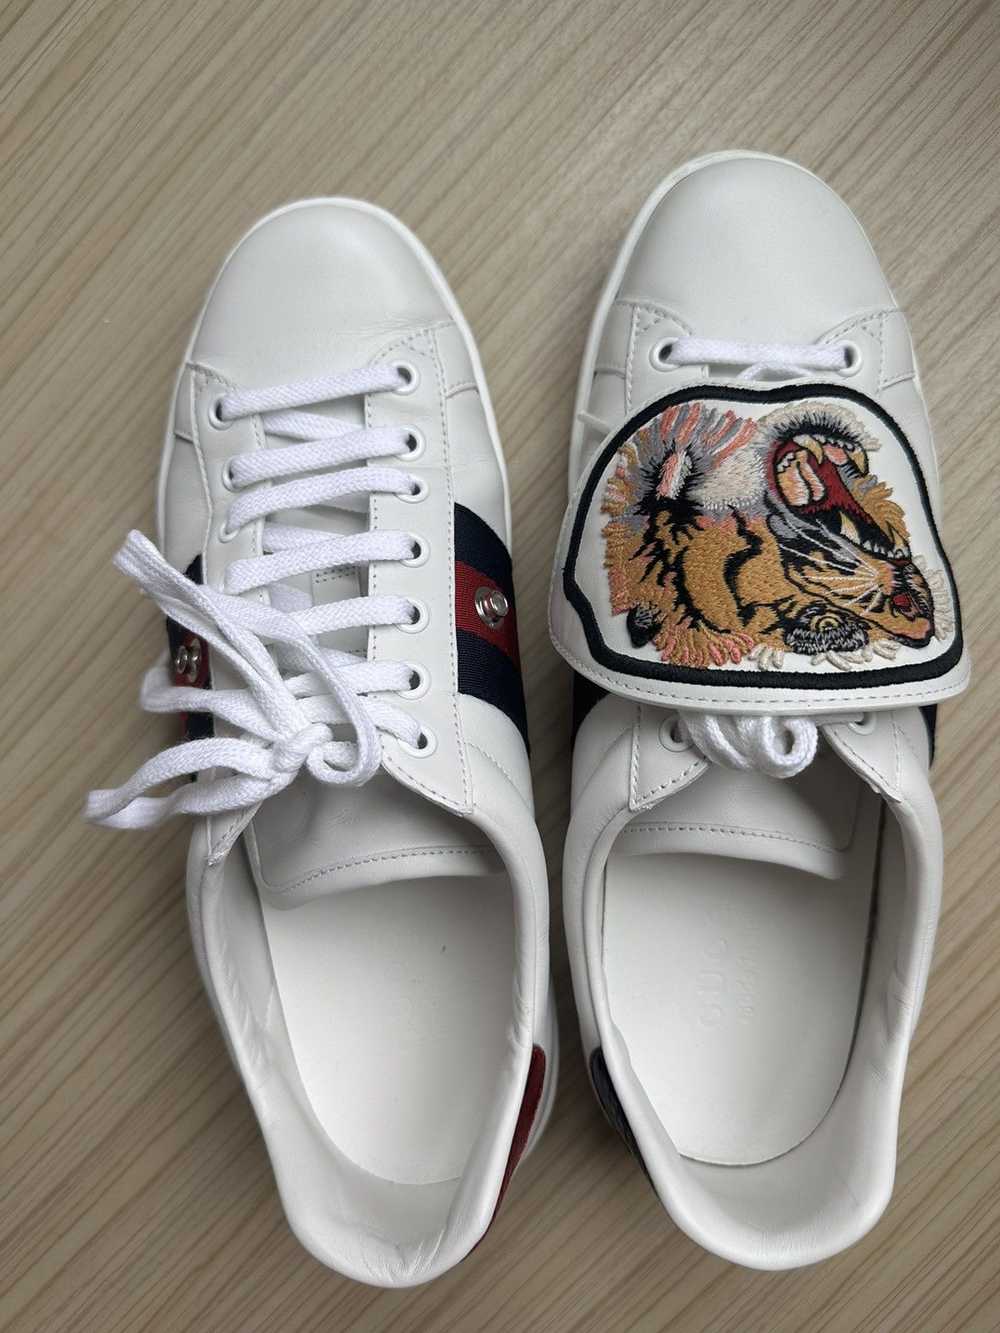 Gucci Gucci Ace Sneakers with Removable Patches - image 3